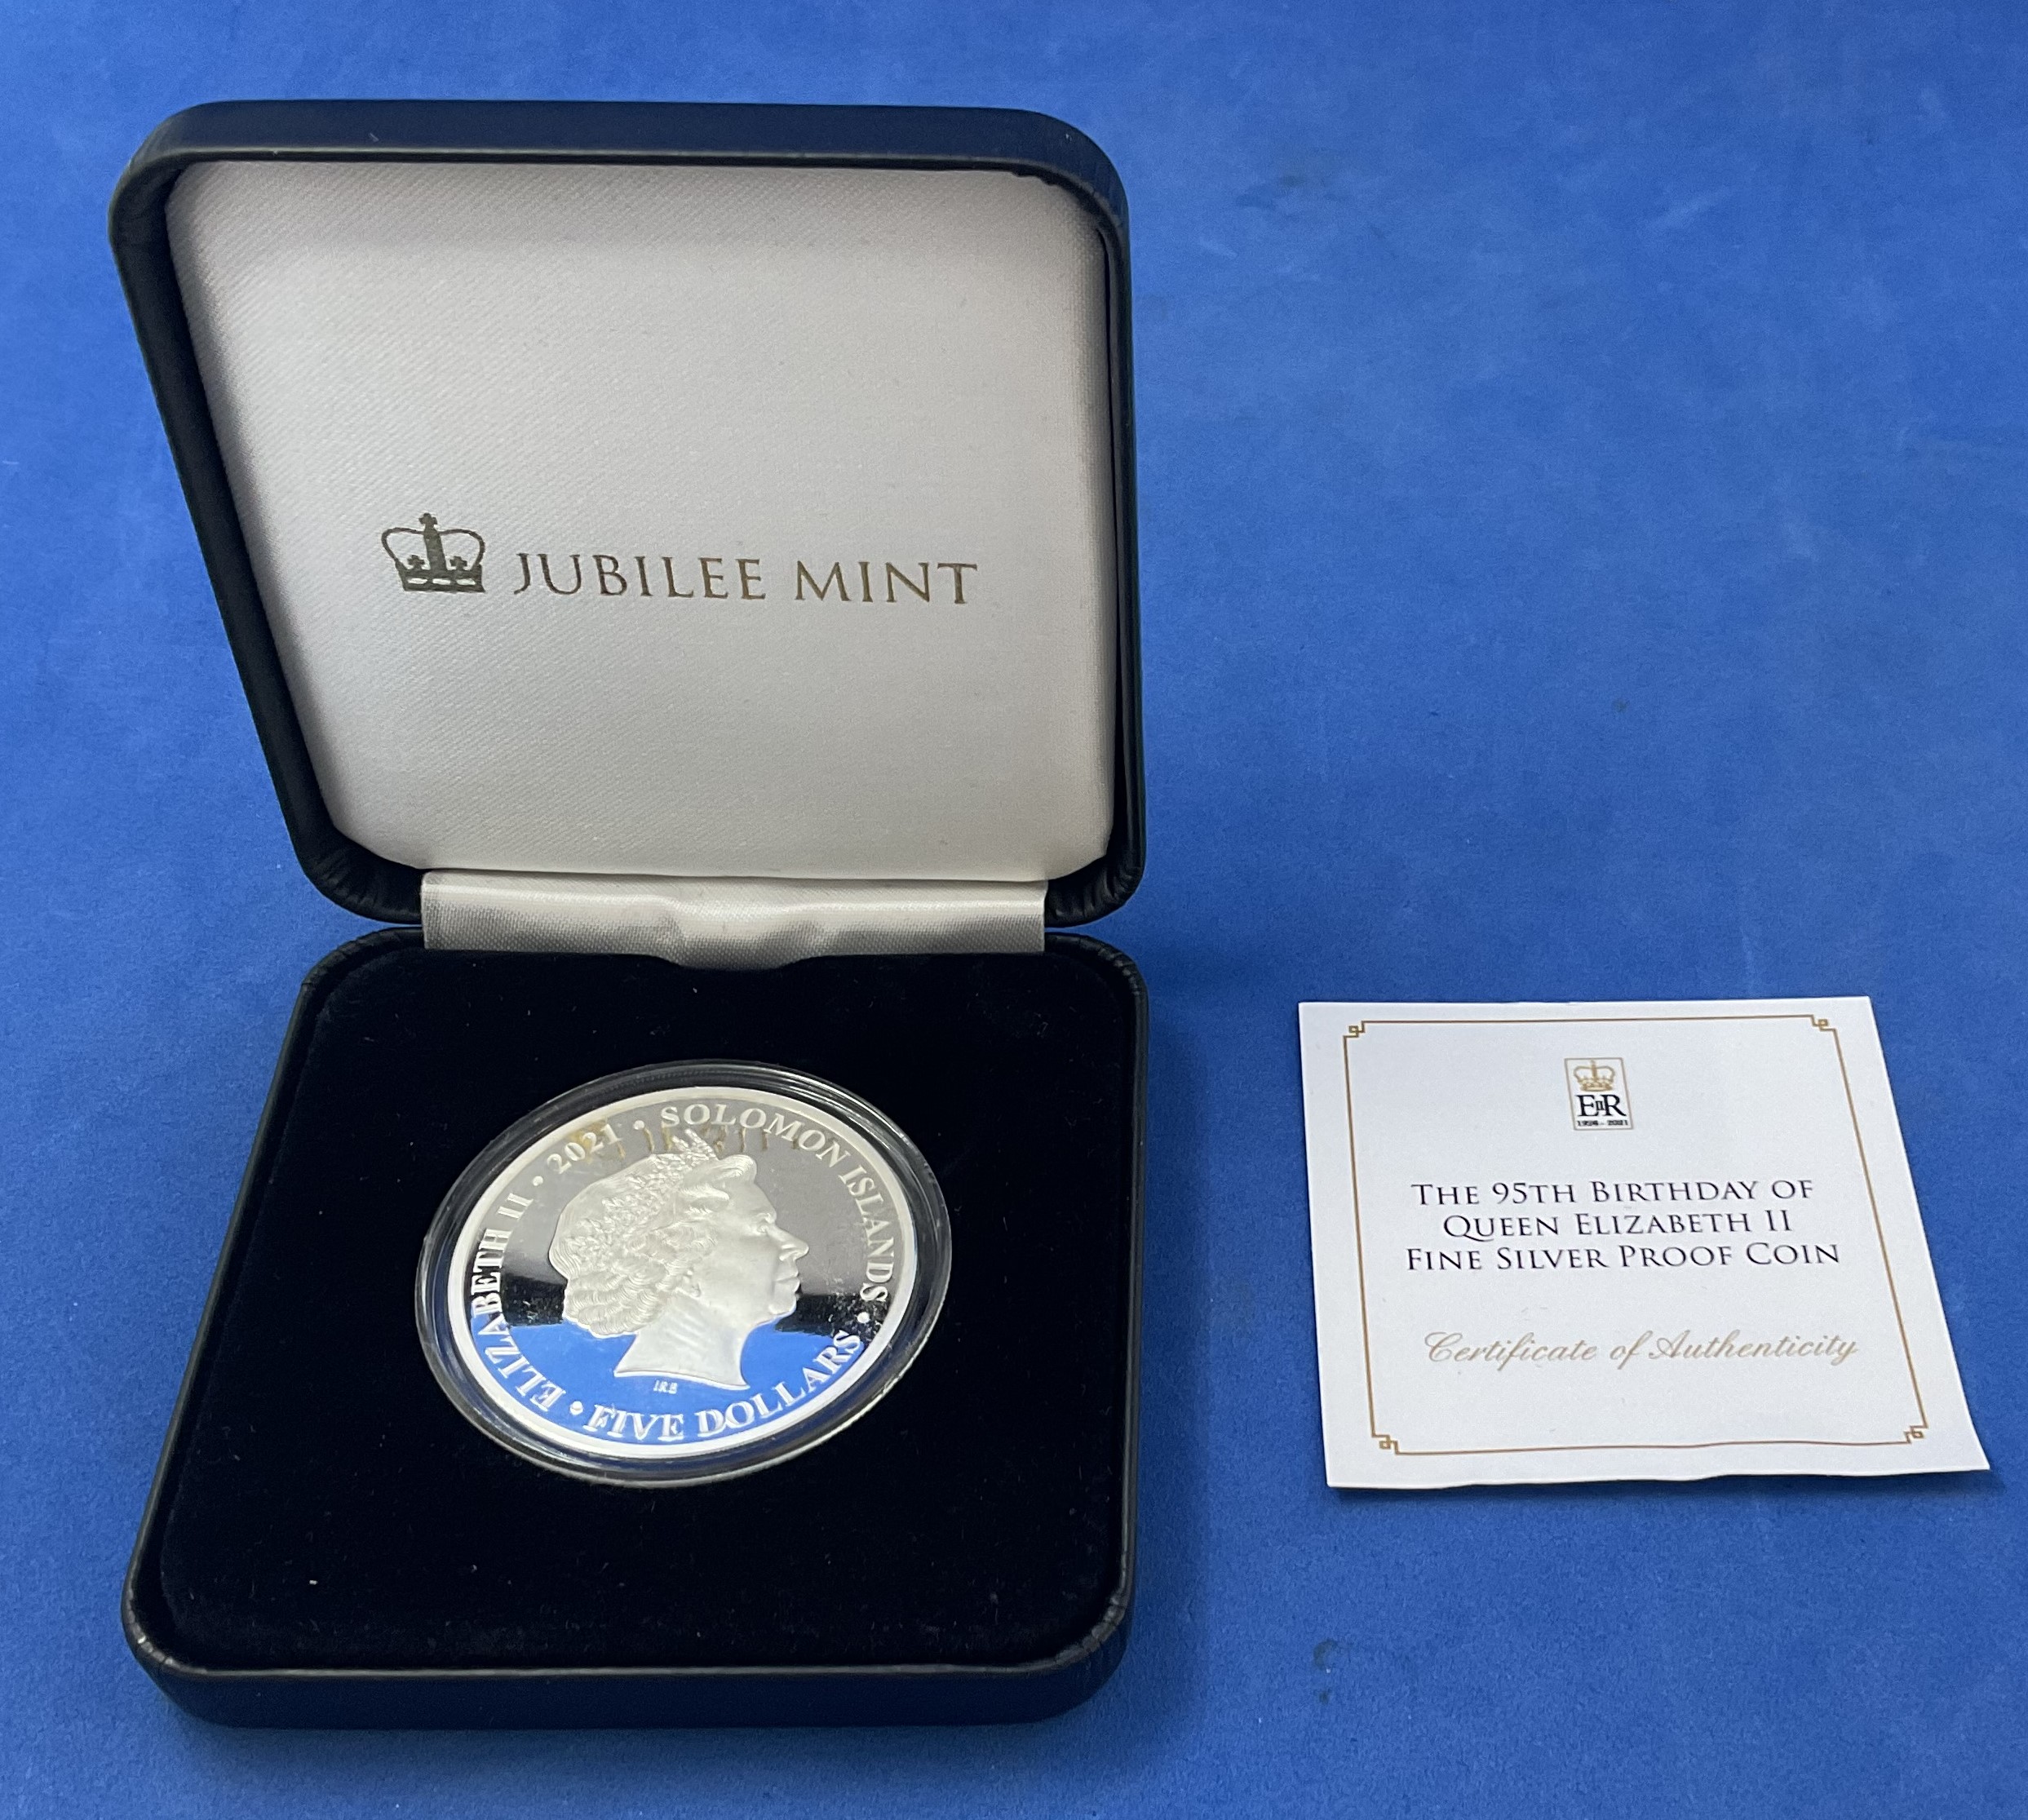 The 95th Birthday of Queen Elizabeth II Coin. The 95th Birthday of Queen Elizabeth II fine silver